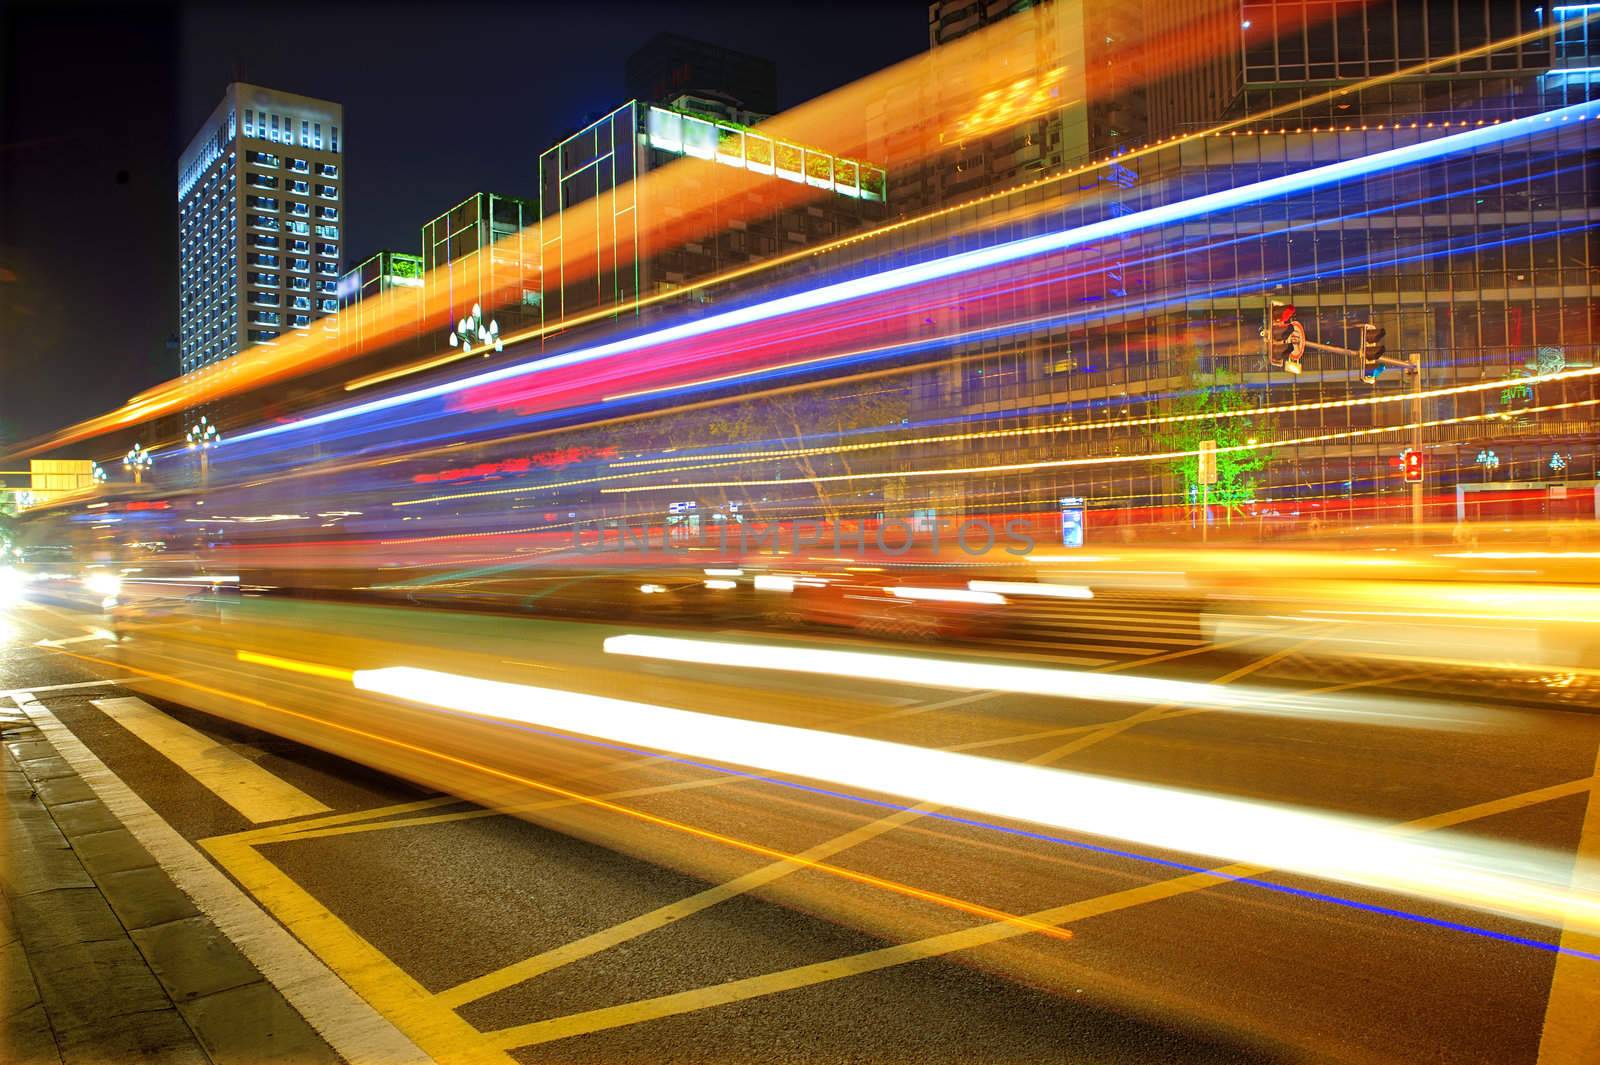 High speed and blurred bus light trails in downtown nightscape by jackq